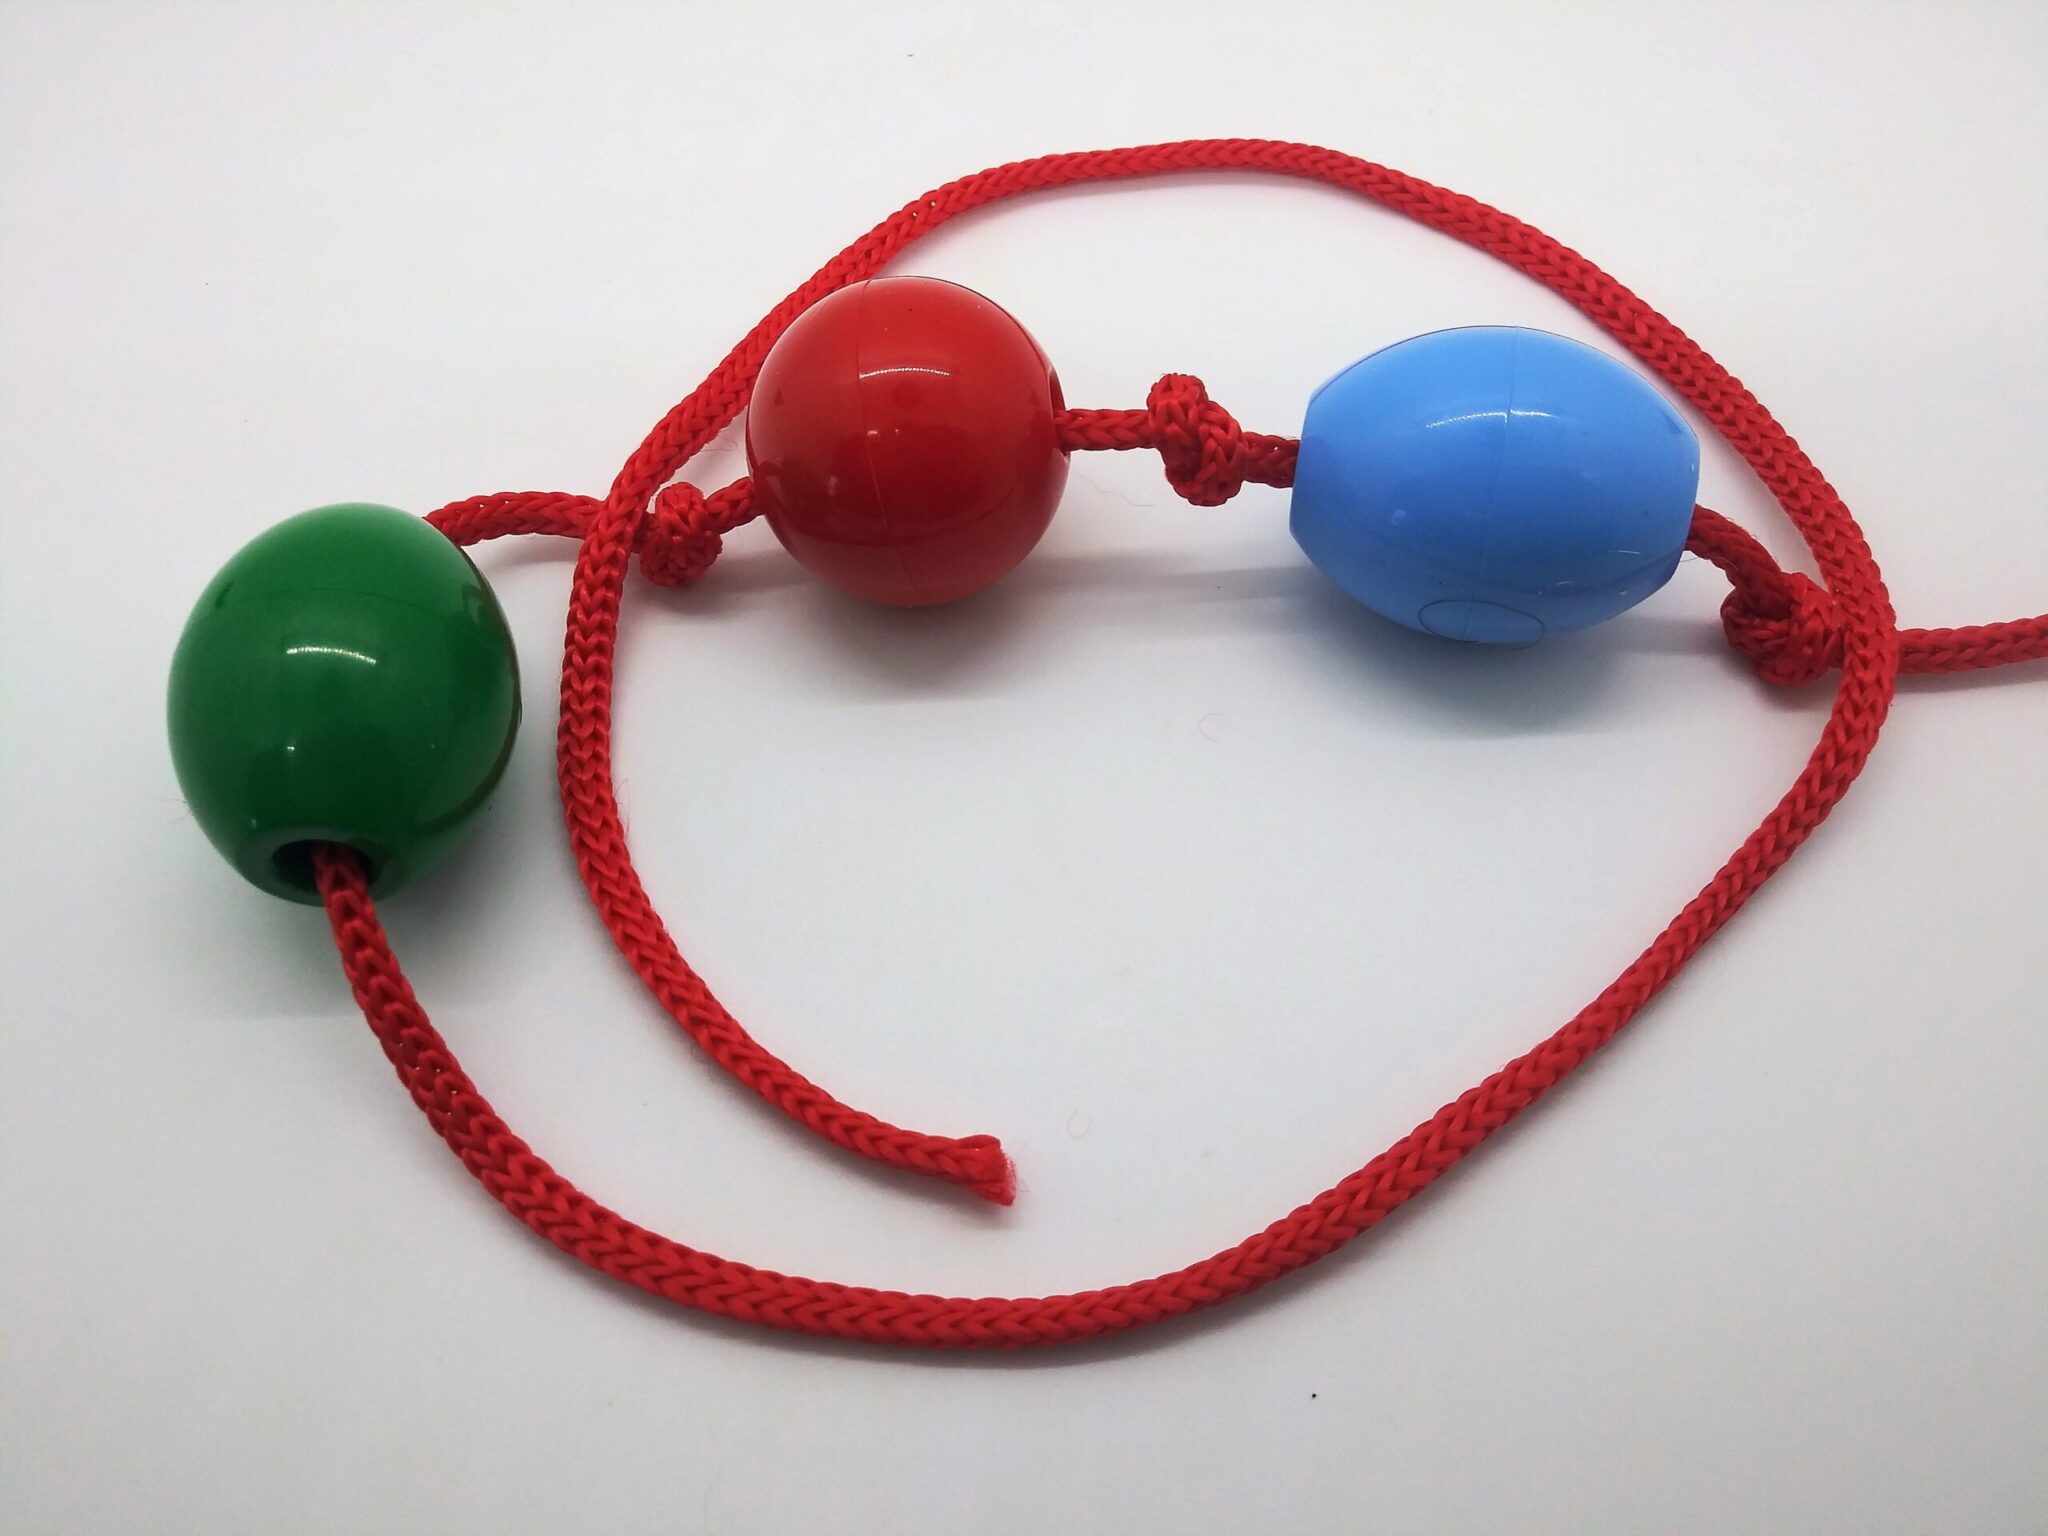 DIY anal beads. photo of 5 plastic beads strung on red nylon rope with knots tied in between each bead.